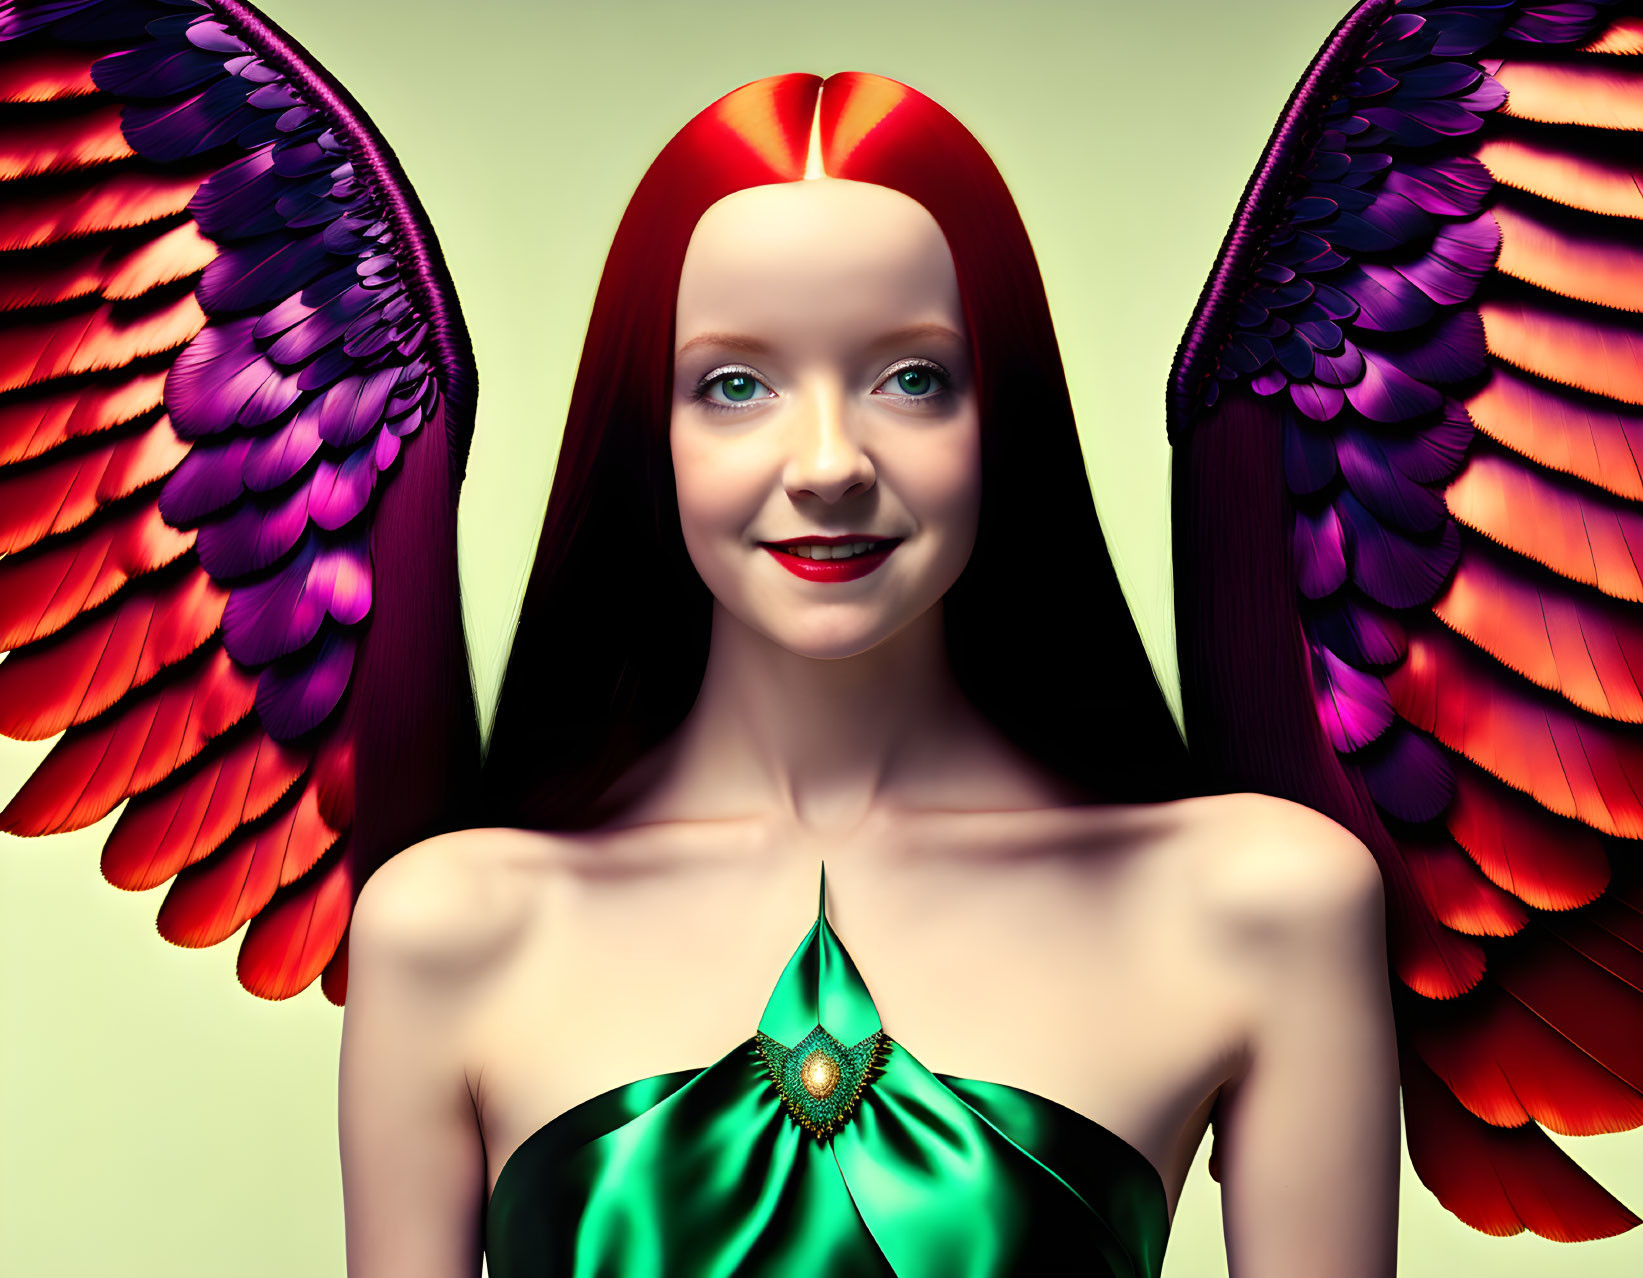 Smiling female figure with red and orange wings, red hair, and green dress.